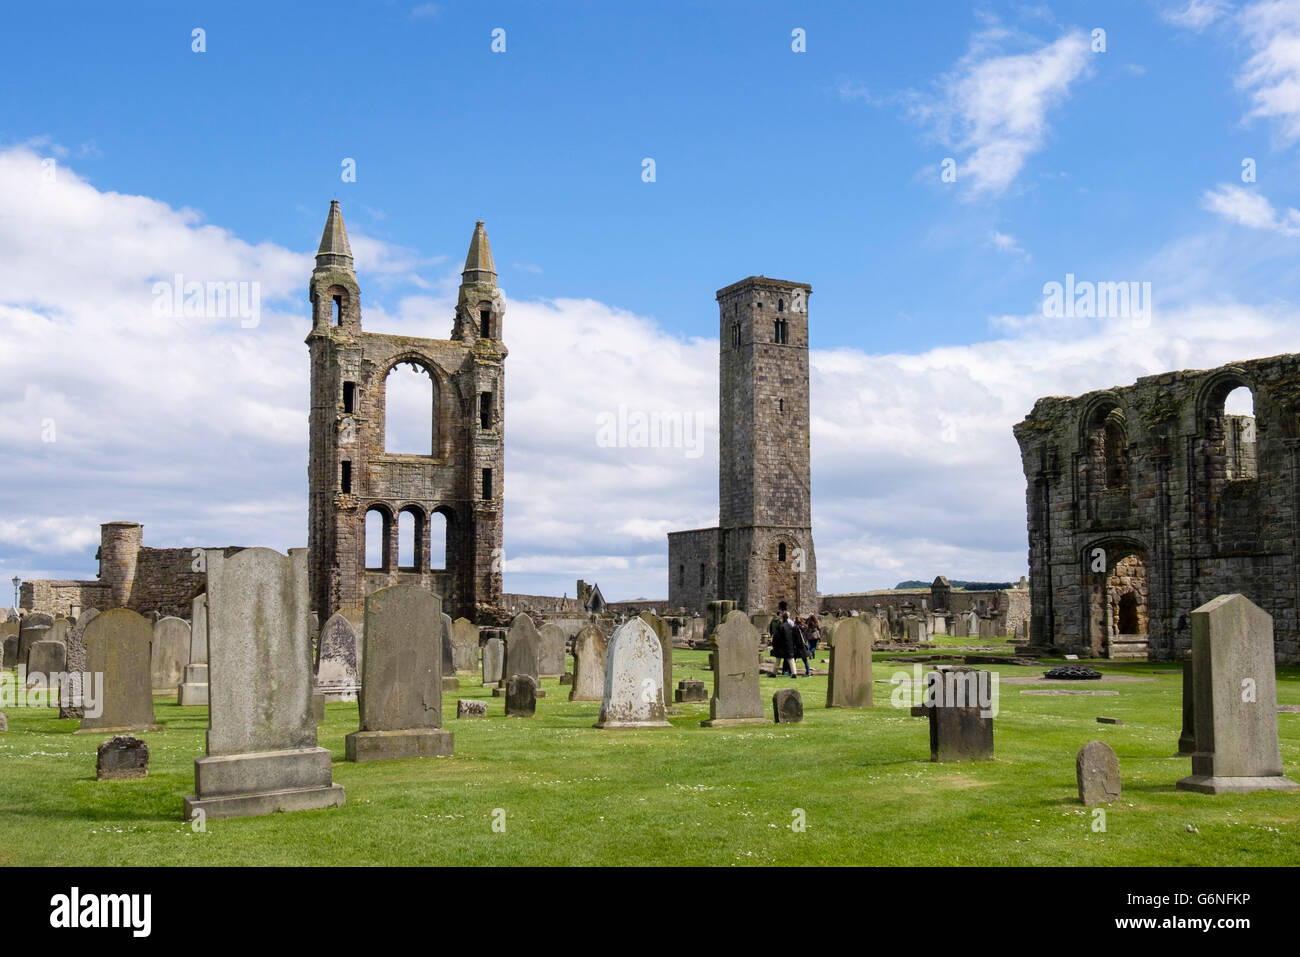 Ruins of East Tower and St Rule's tower in St Andrew's cathedral. Royal Burgh of St Andrews, Fife, Scotland, UK, Britain Stock Photo